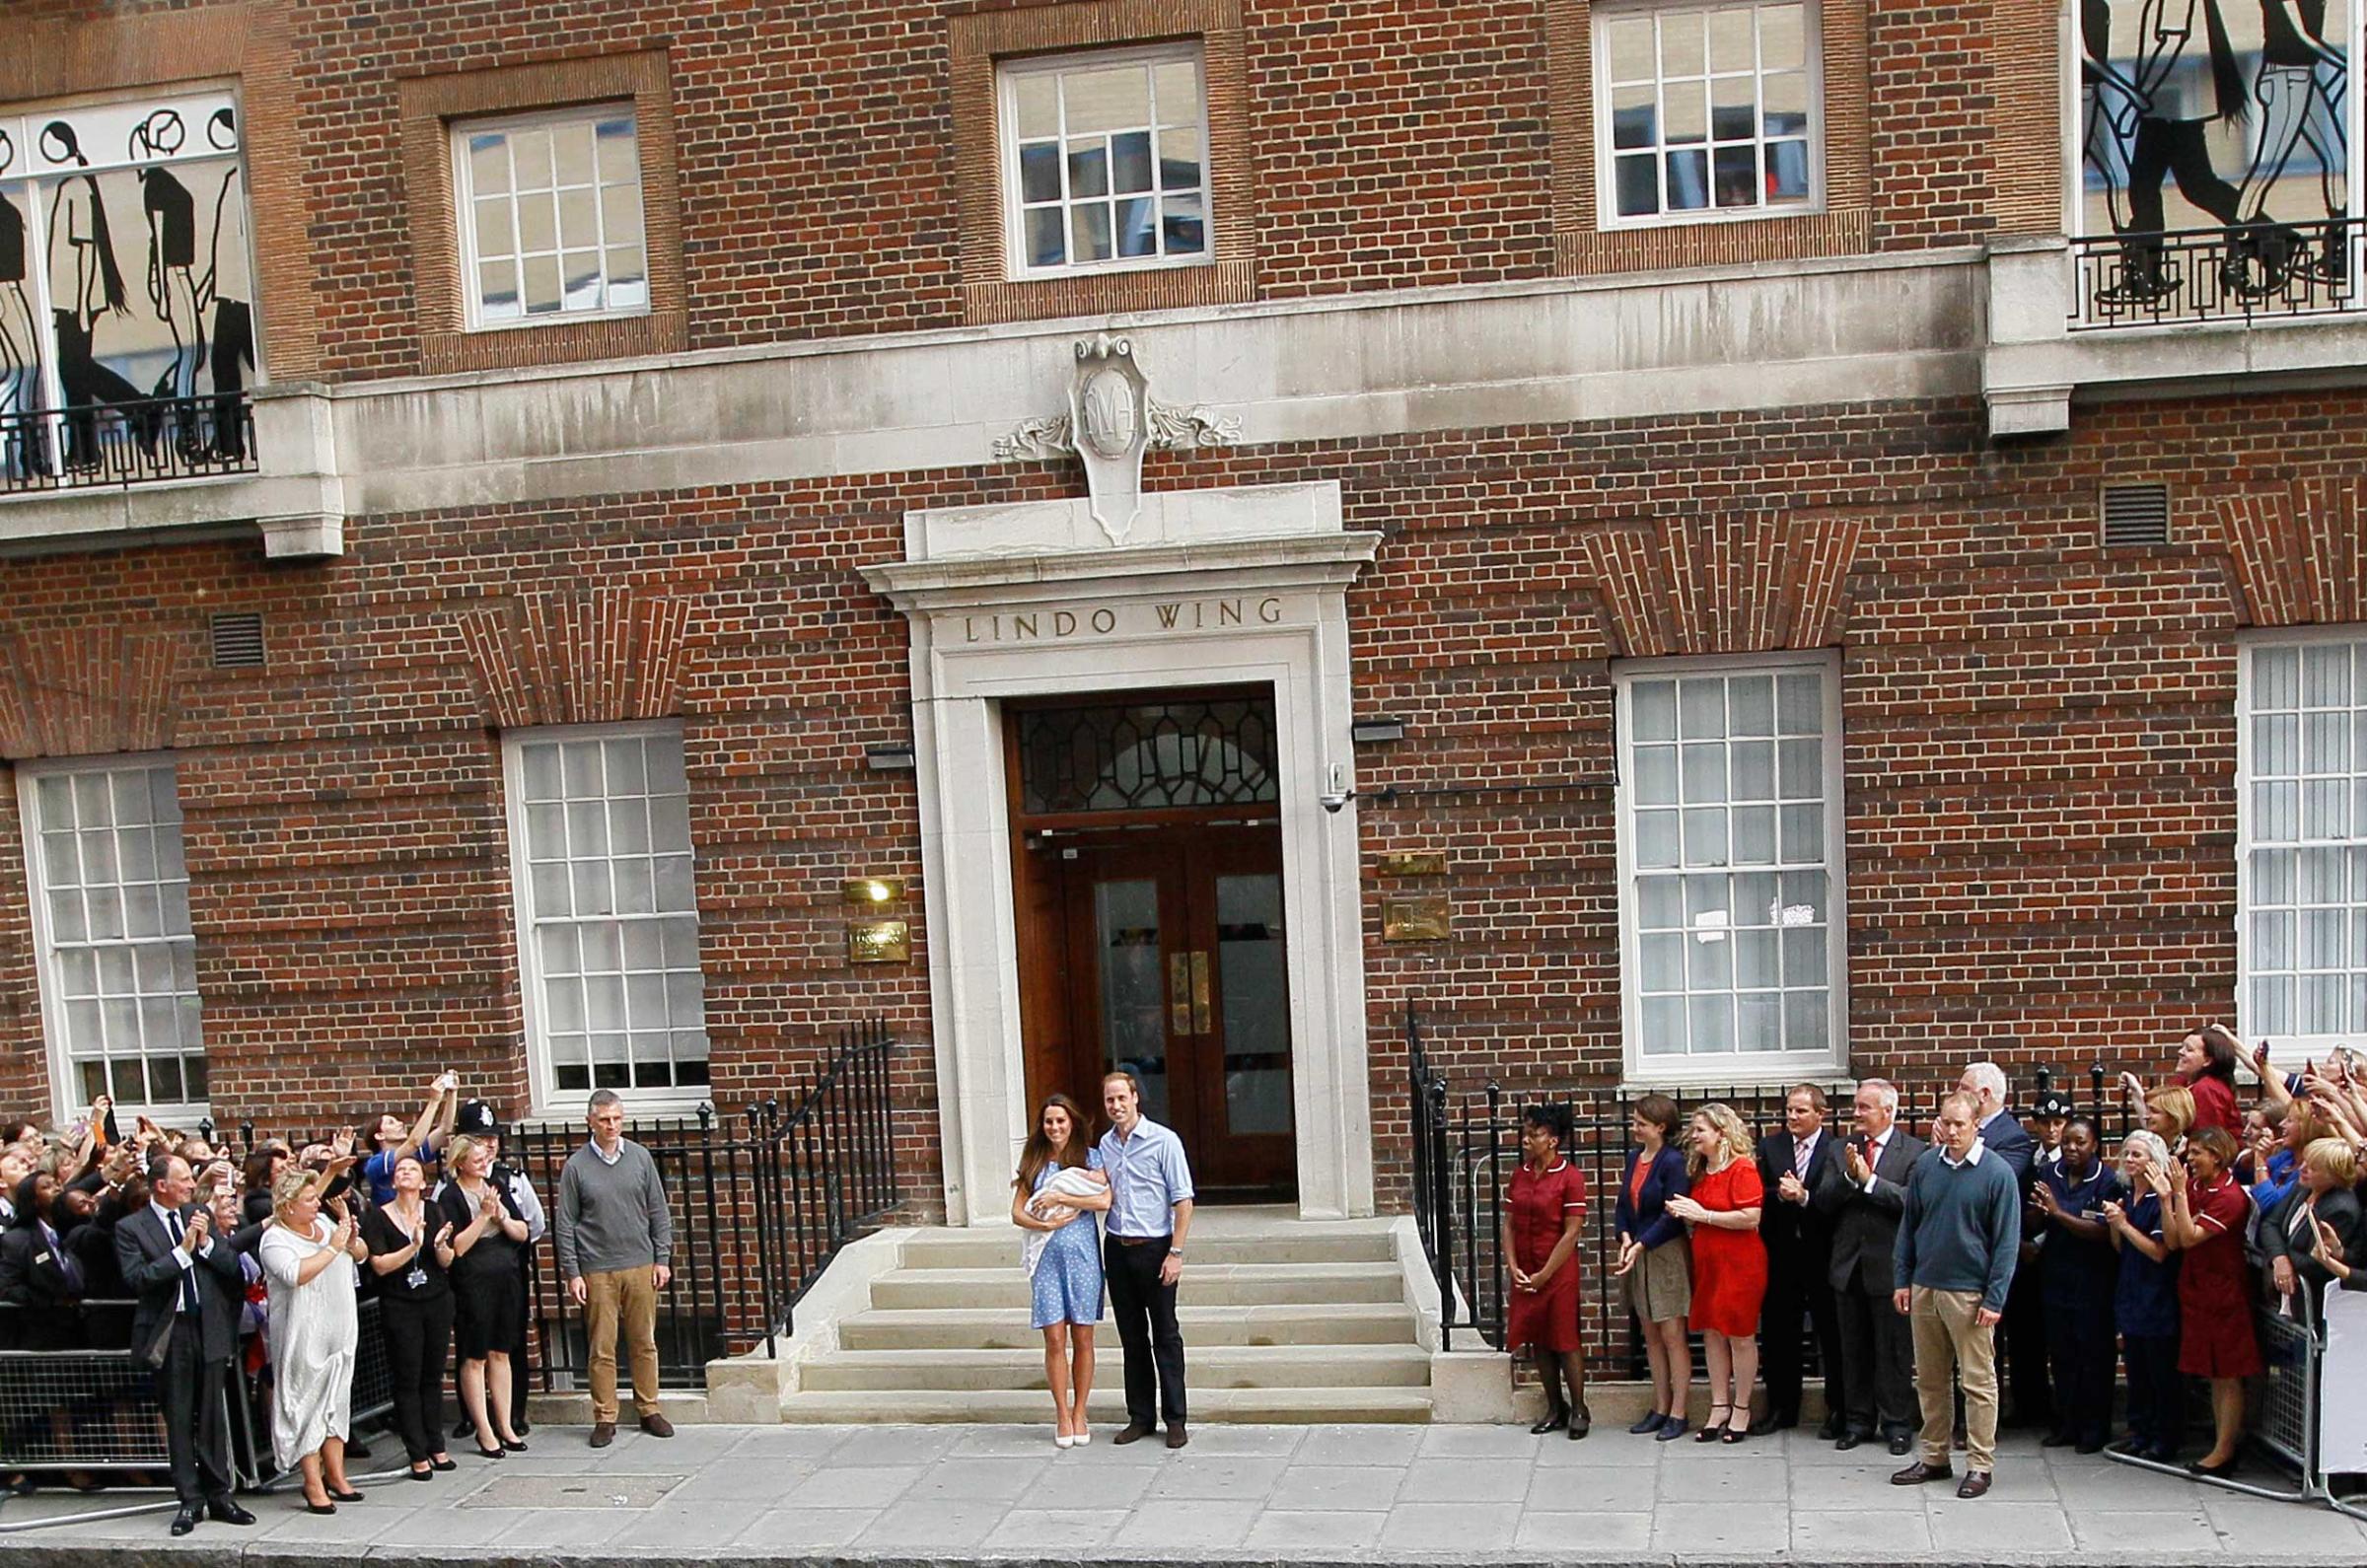 Britain's Prince William, right, and Kate, Duchess of Cambridge hold the Prince of Cambridge, Tuesday July 23, 2013, as they pose for photographers outside St. Mary's Hospital exclusive Lindo Wing in London where the Duchess gave birth on Monday July 22. The boy, who is third in line to the British throne, has since been named George Alexander Louis by his parents and will be known as Prince George of Cambridge. (AP Photo/Kirsty Wigglesworth)